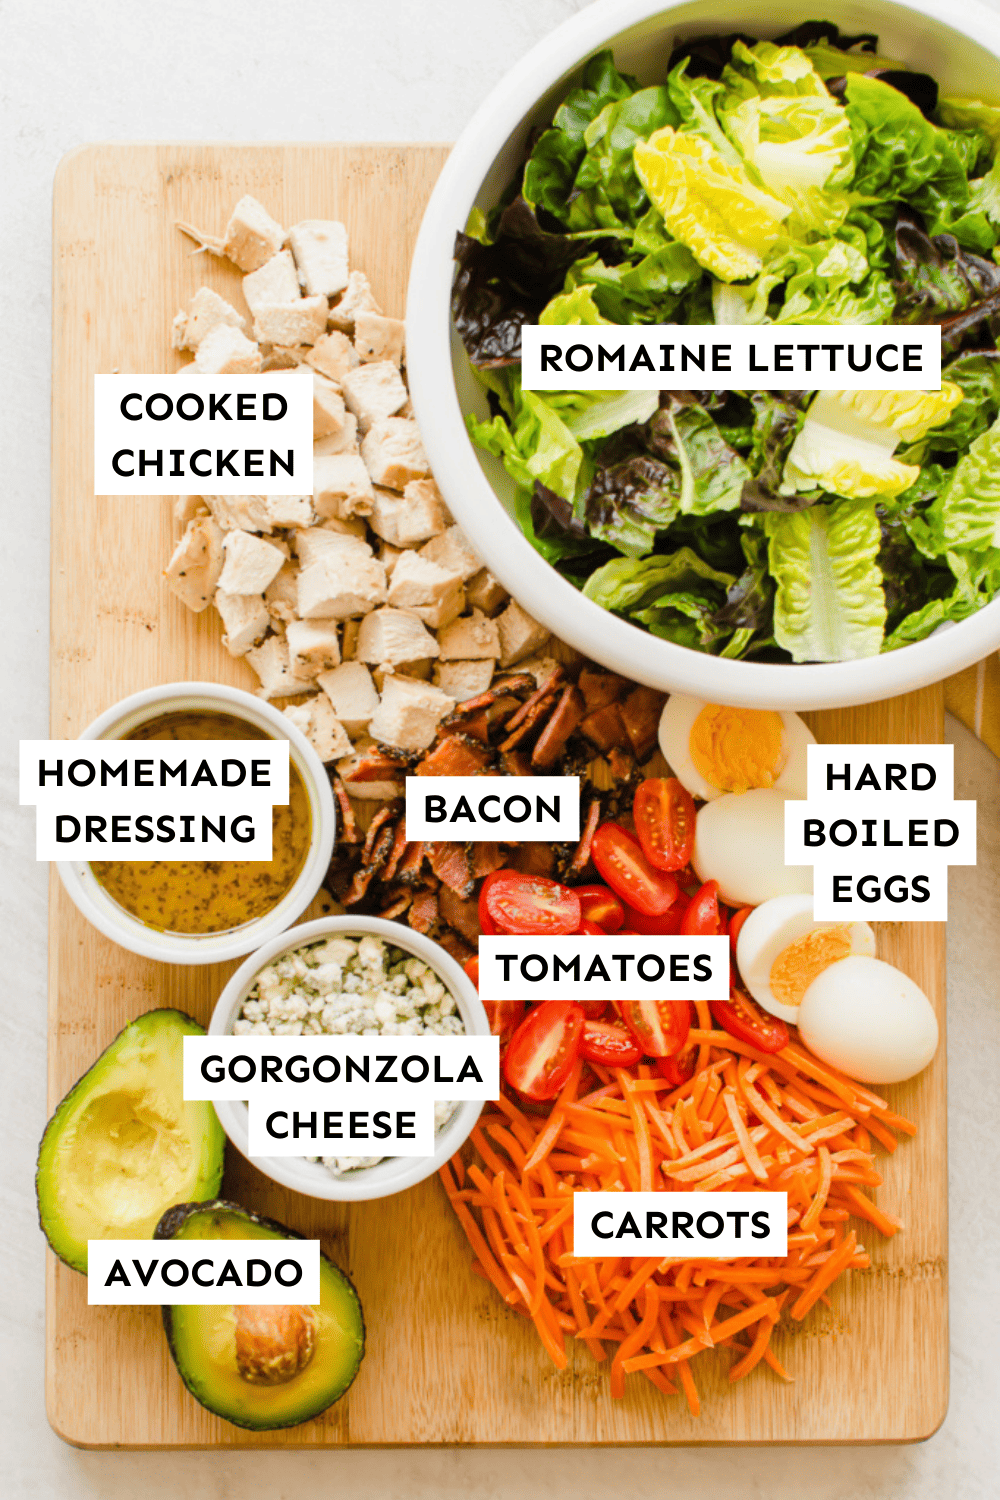 Cobb salad ingredients laid out on a wooden cutting board and labeled.